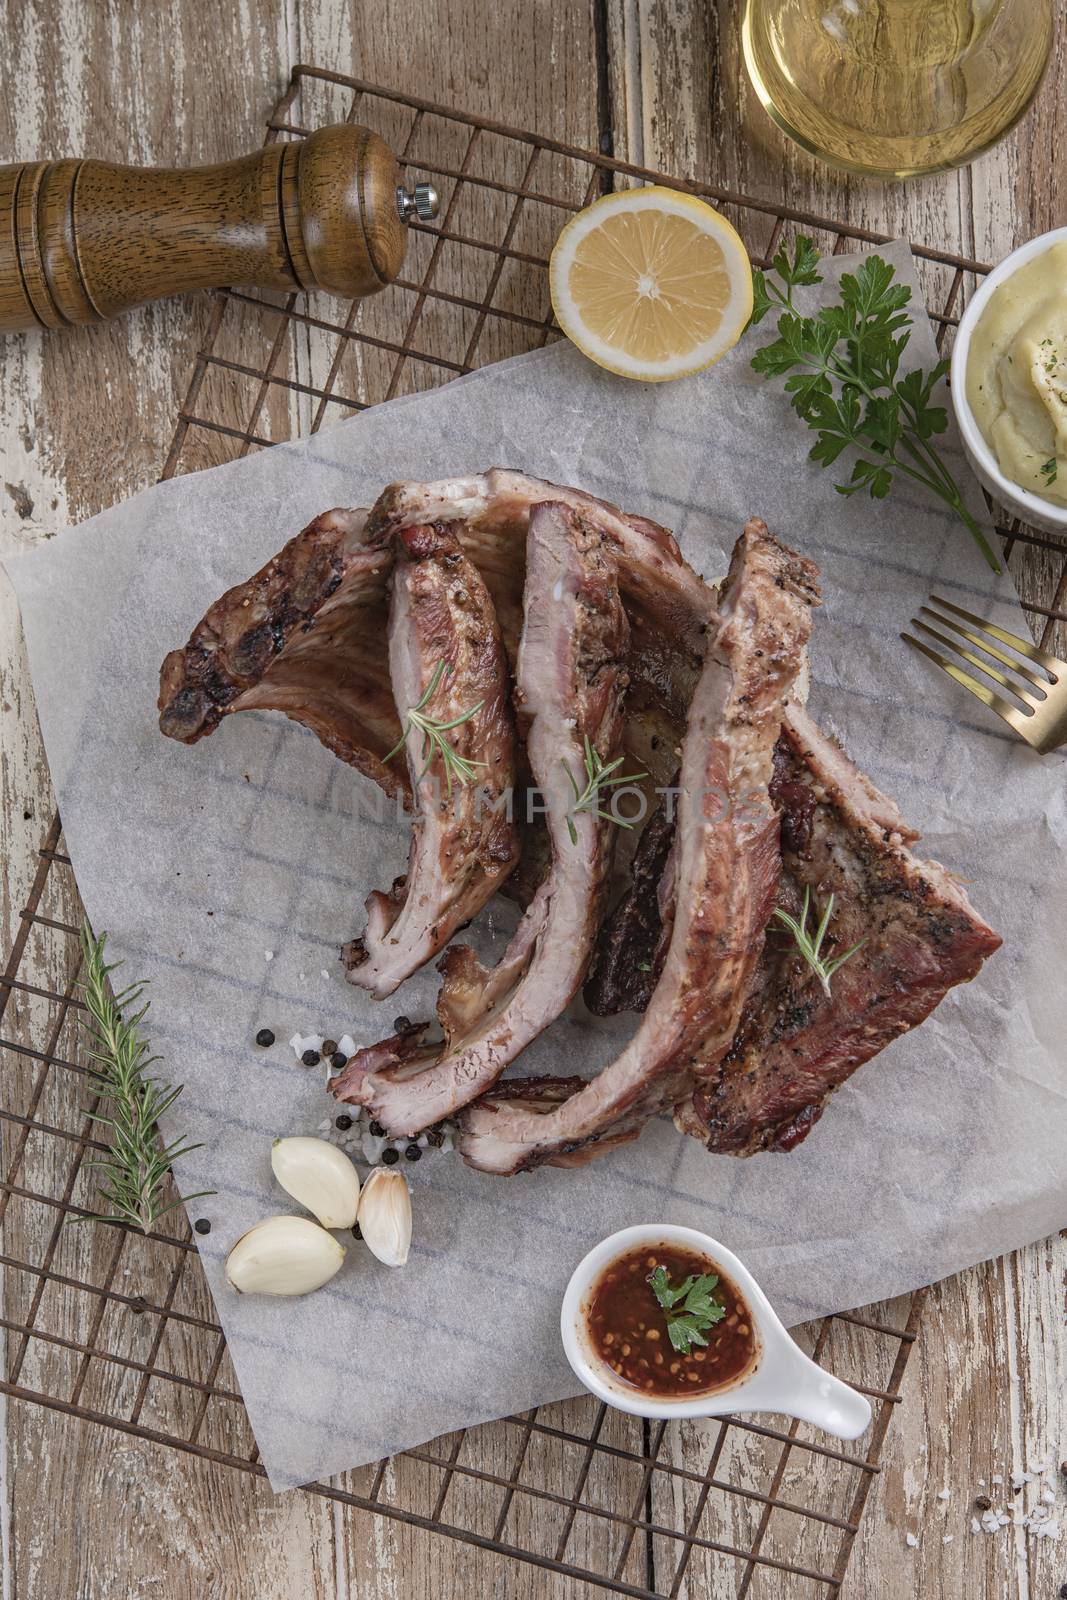 Grilled pork ribs with mashed potatoes placed on a wooden table.